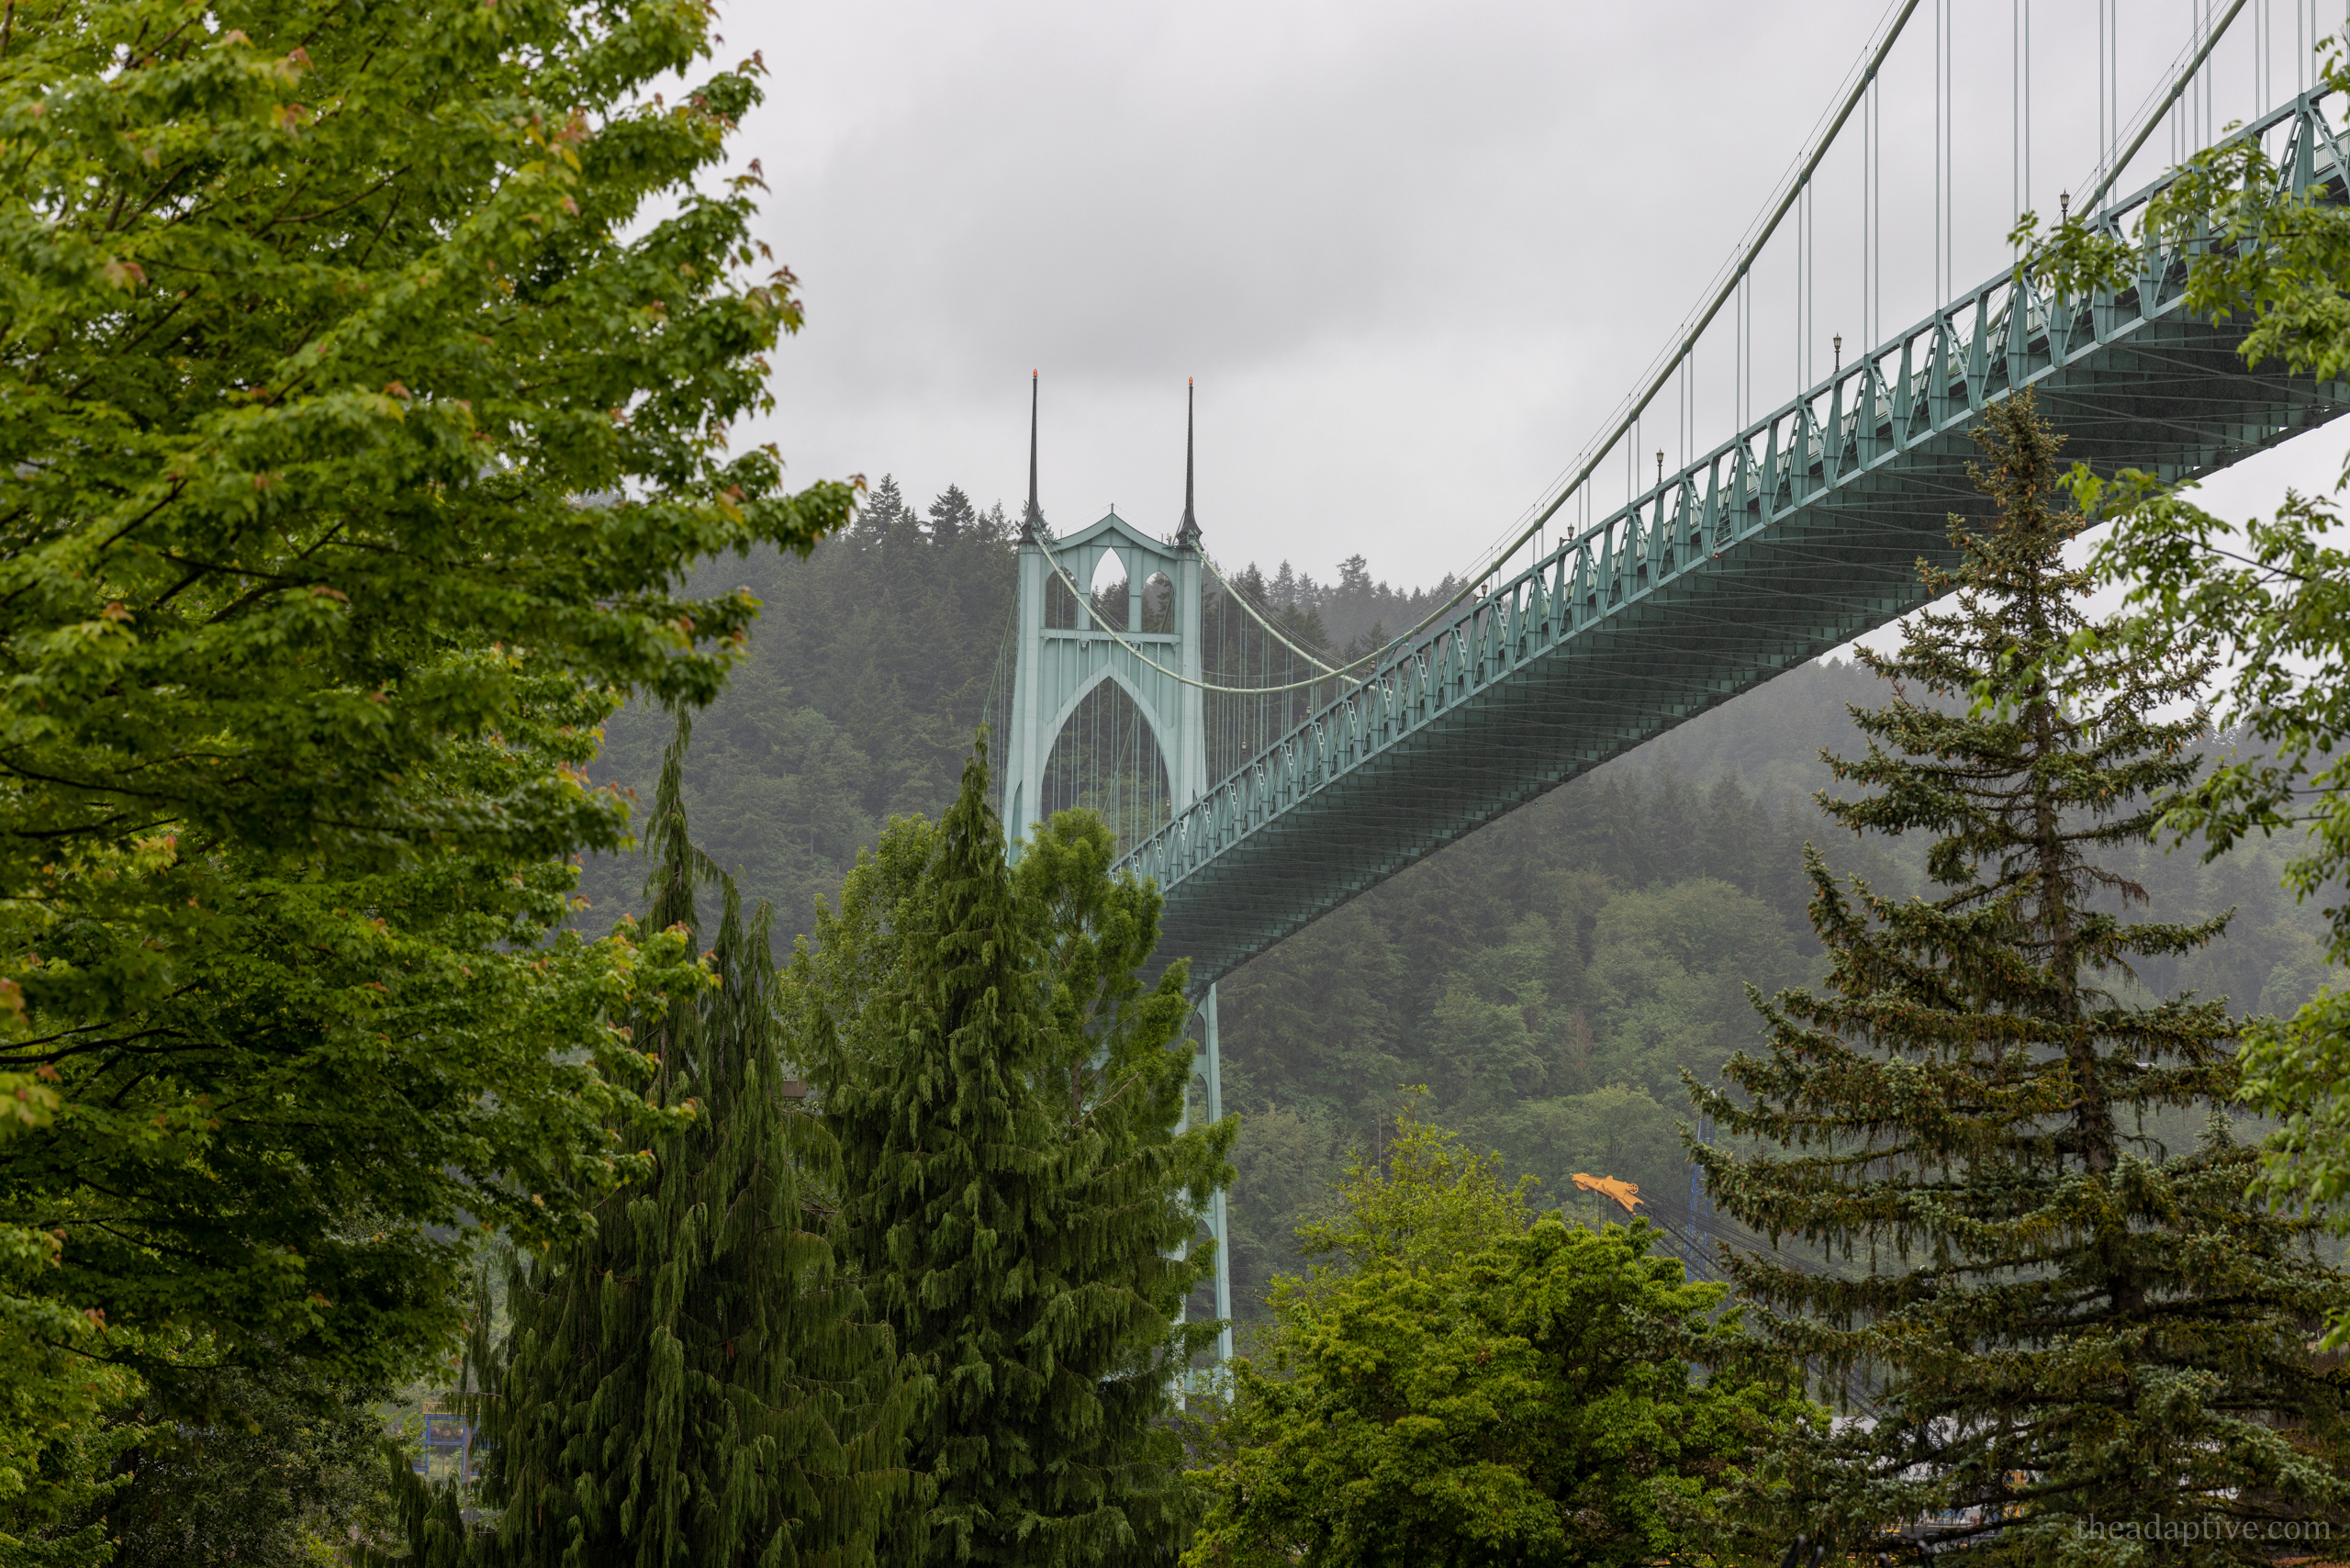 St. John's Bridge on a perfectly warm and rainy day, June 2022.